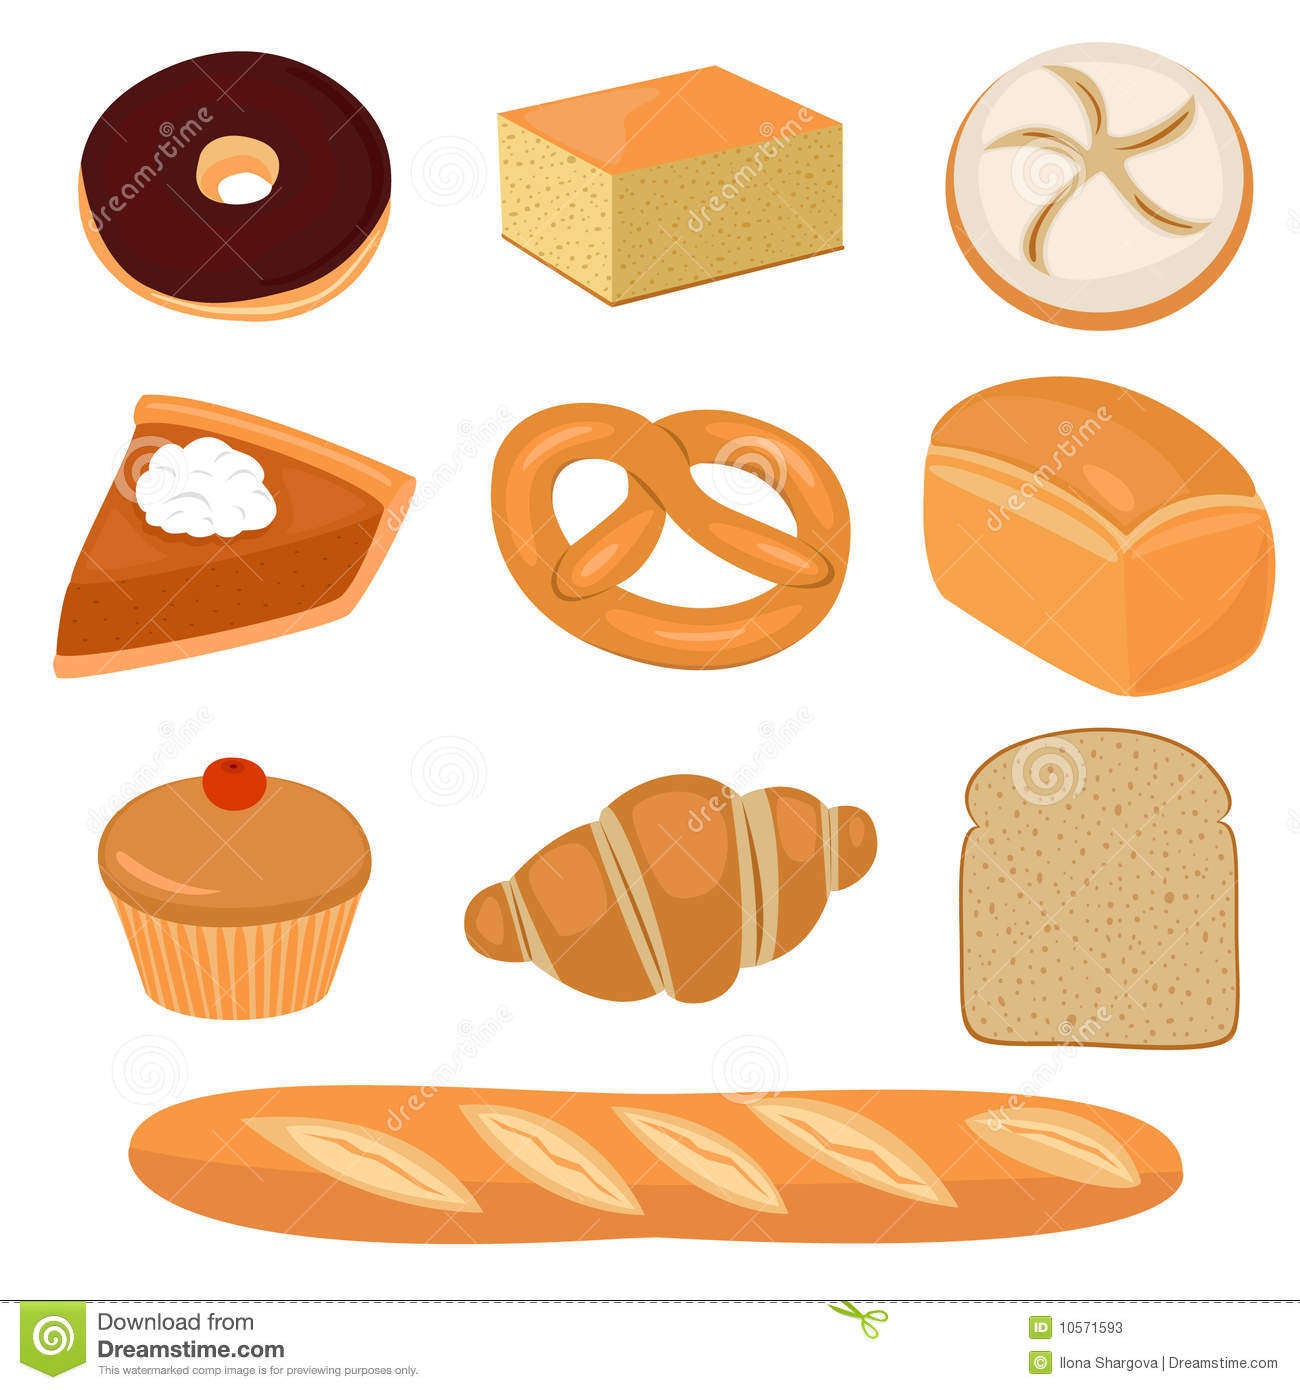 Bread And Pastry Clip Art Stock Photos   Image  10571593